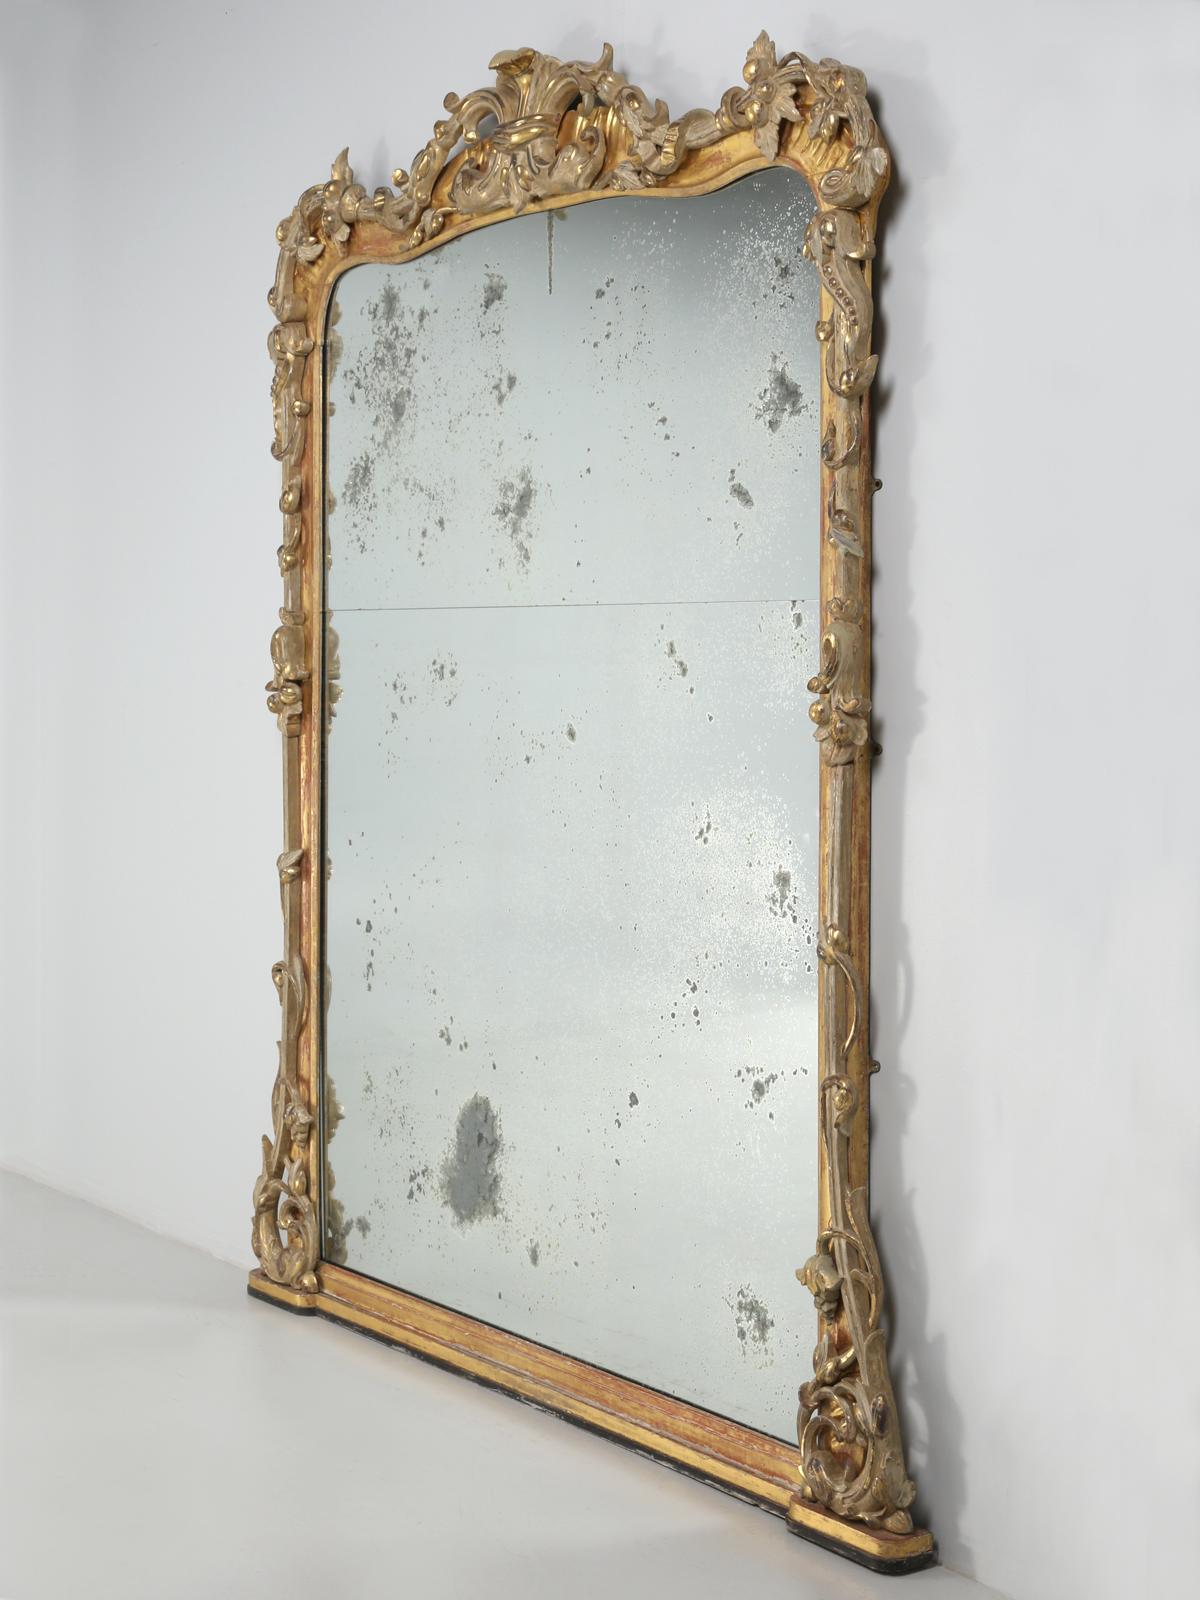 There is a long story behind this huge antique gilded mirror from Scotland and it begins in Colne, England, which dates itself back to the “Stone Age”. This magnificent, carved and water gilded Scottish mirror, sat upstairs, in an antique dealer’s